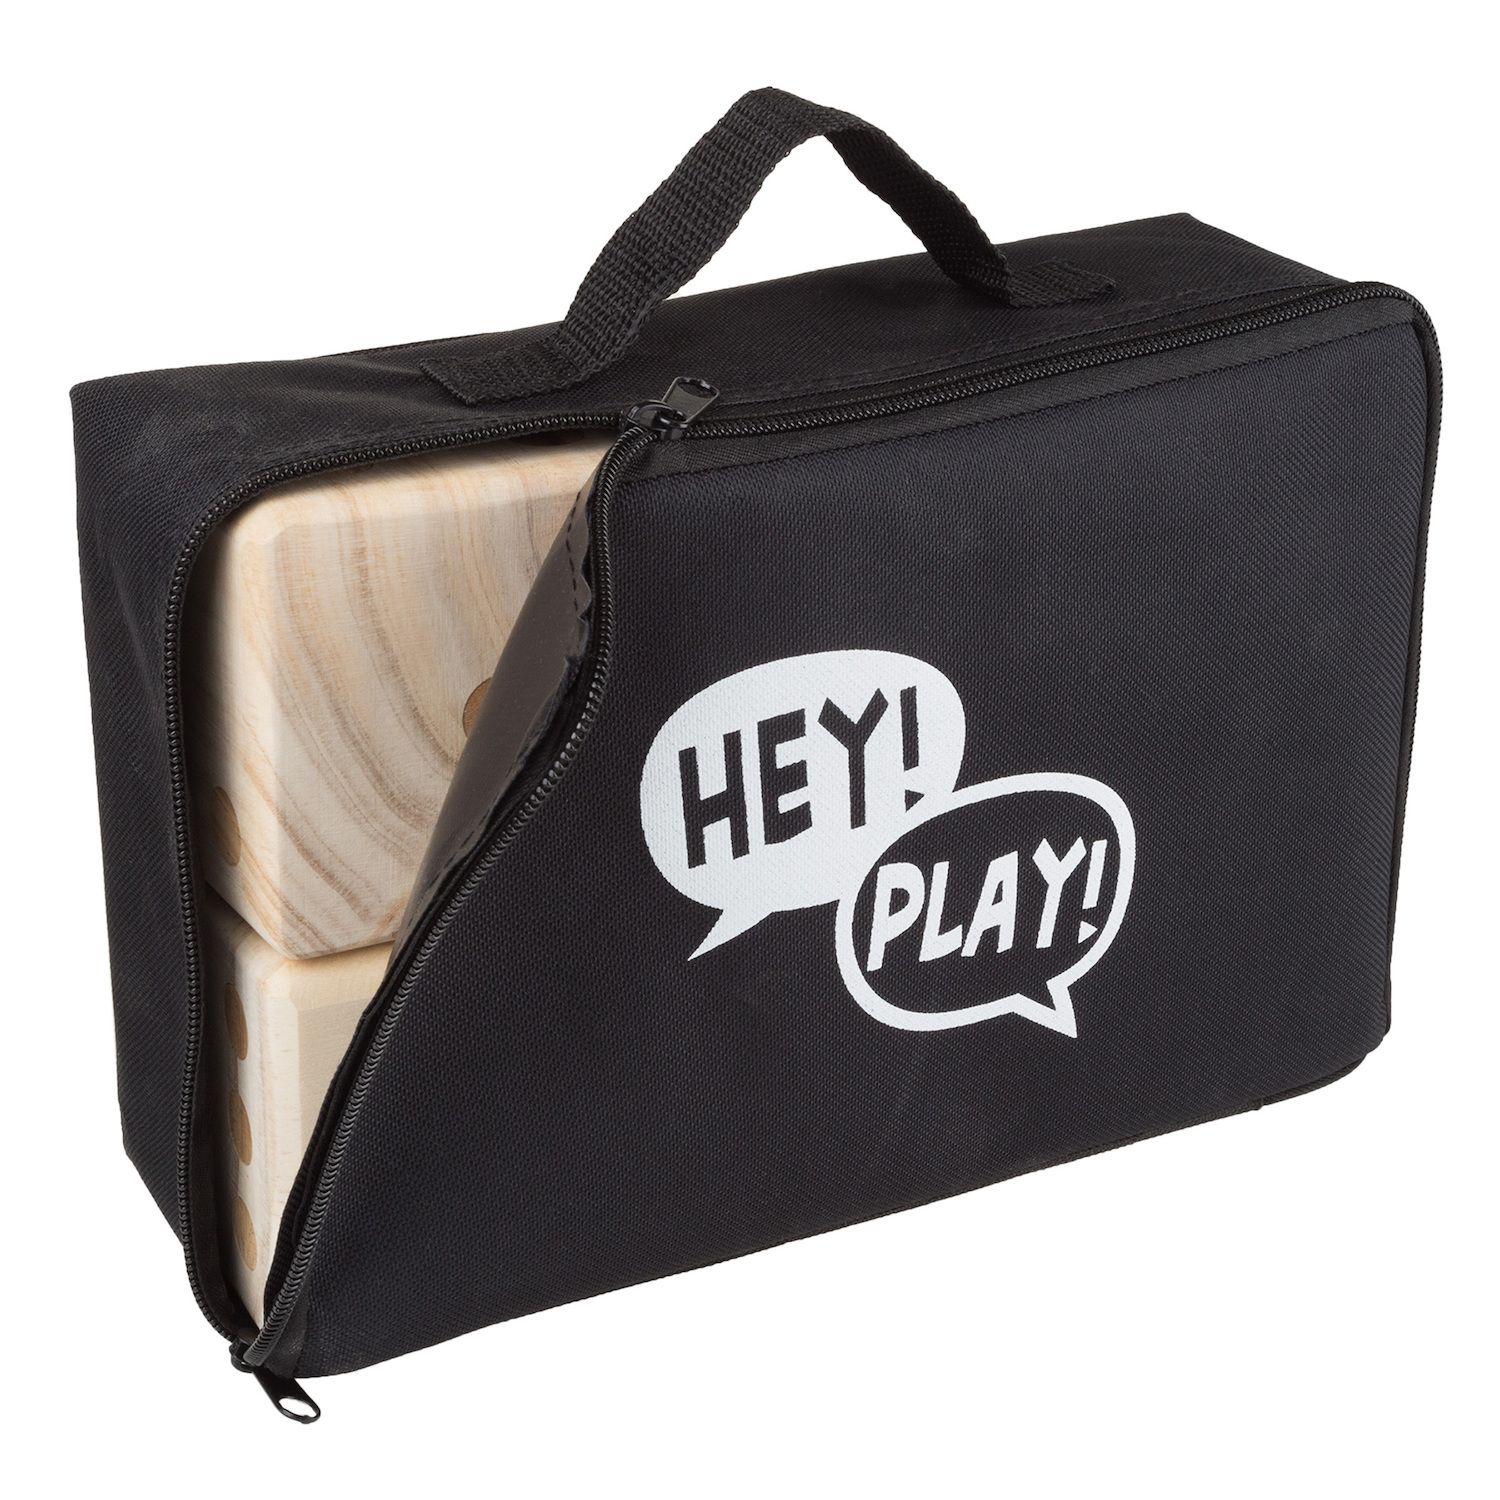 Image for Hey! Play! Giant Wooden Yard Dice Outdoor Lawn Game at Kohl's.